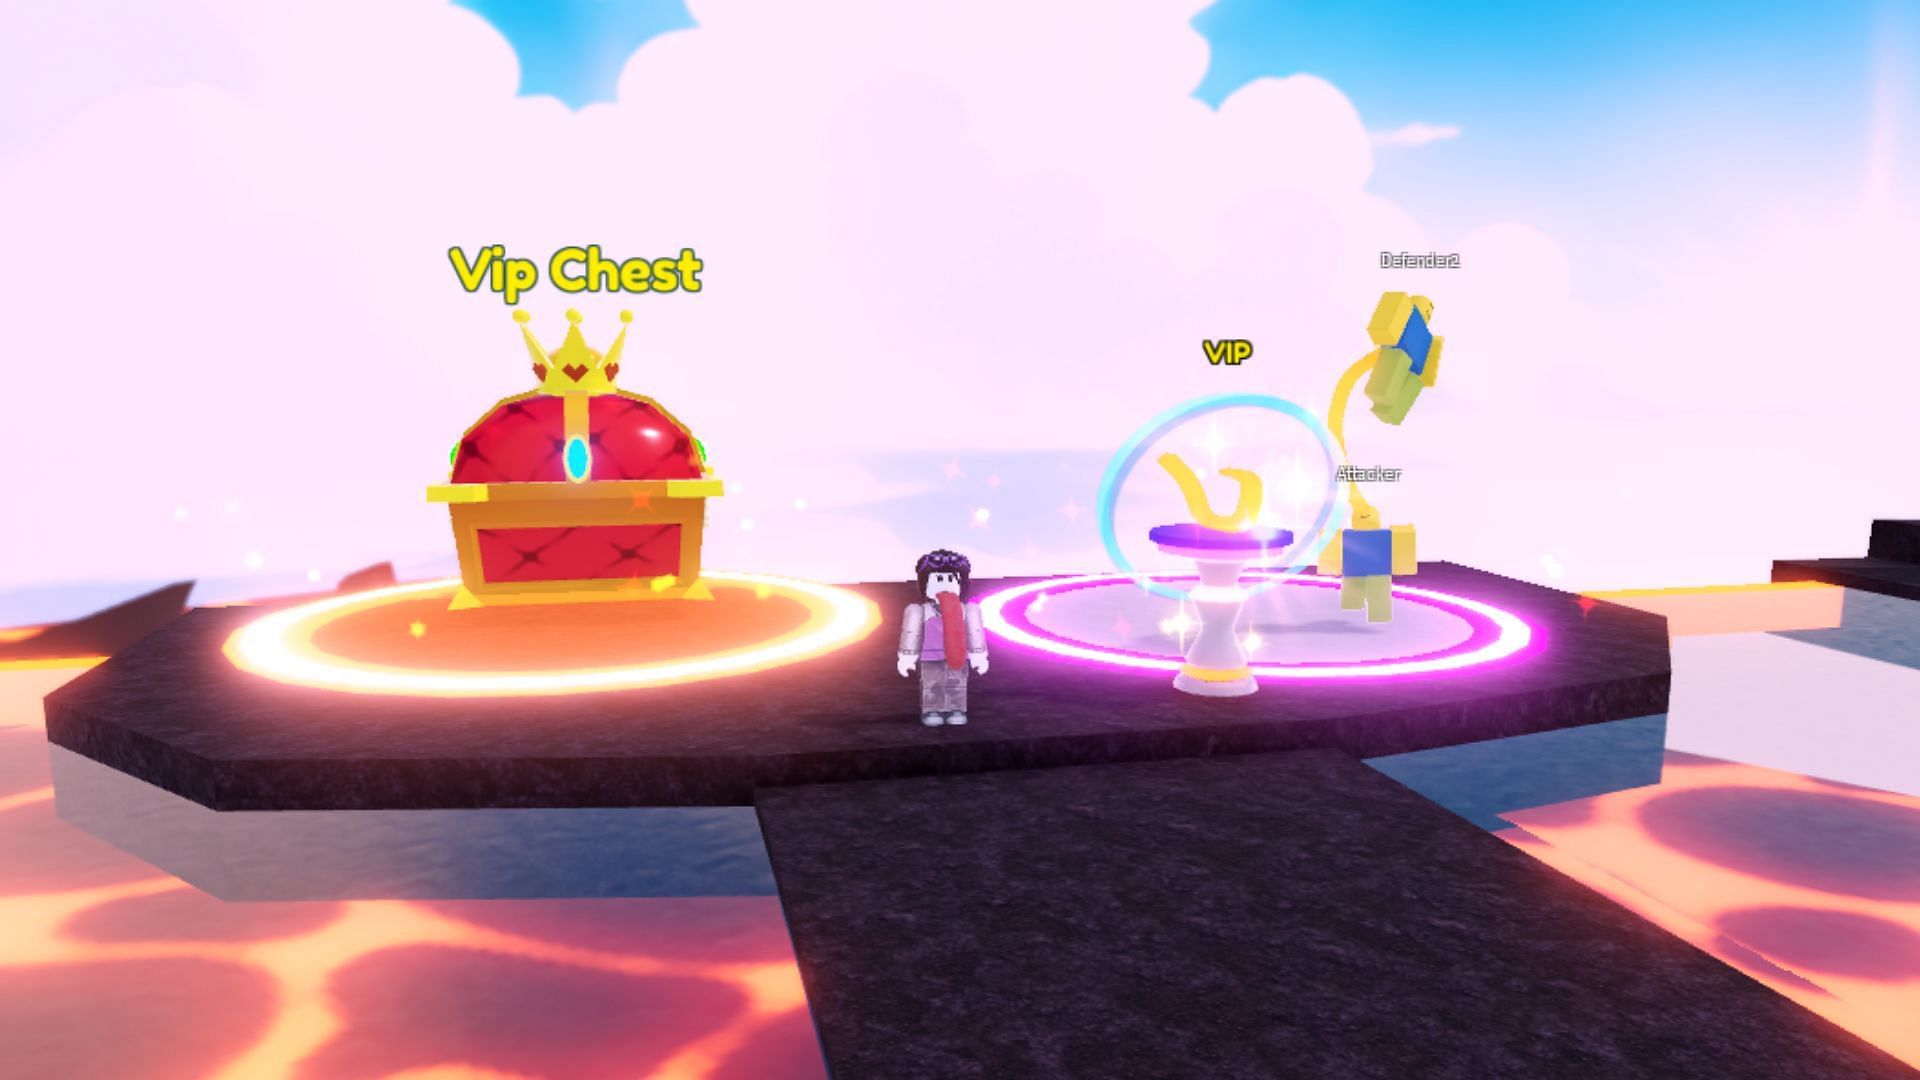 VIP chest in Tongue Battles (Image via Roblox)